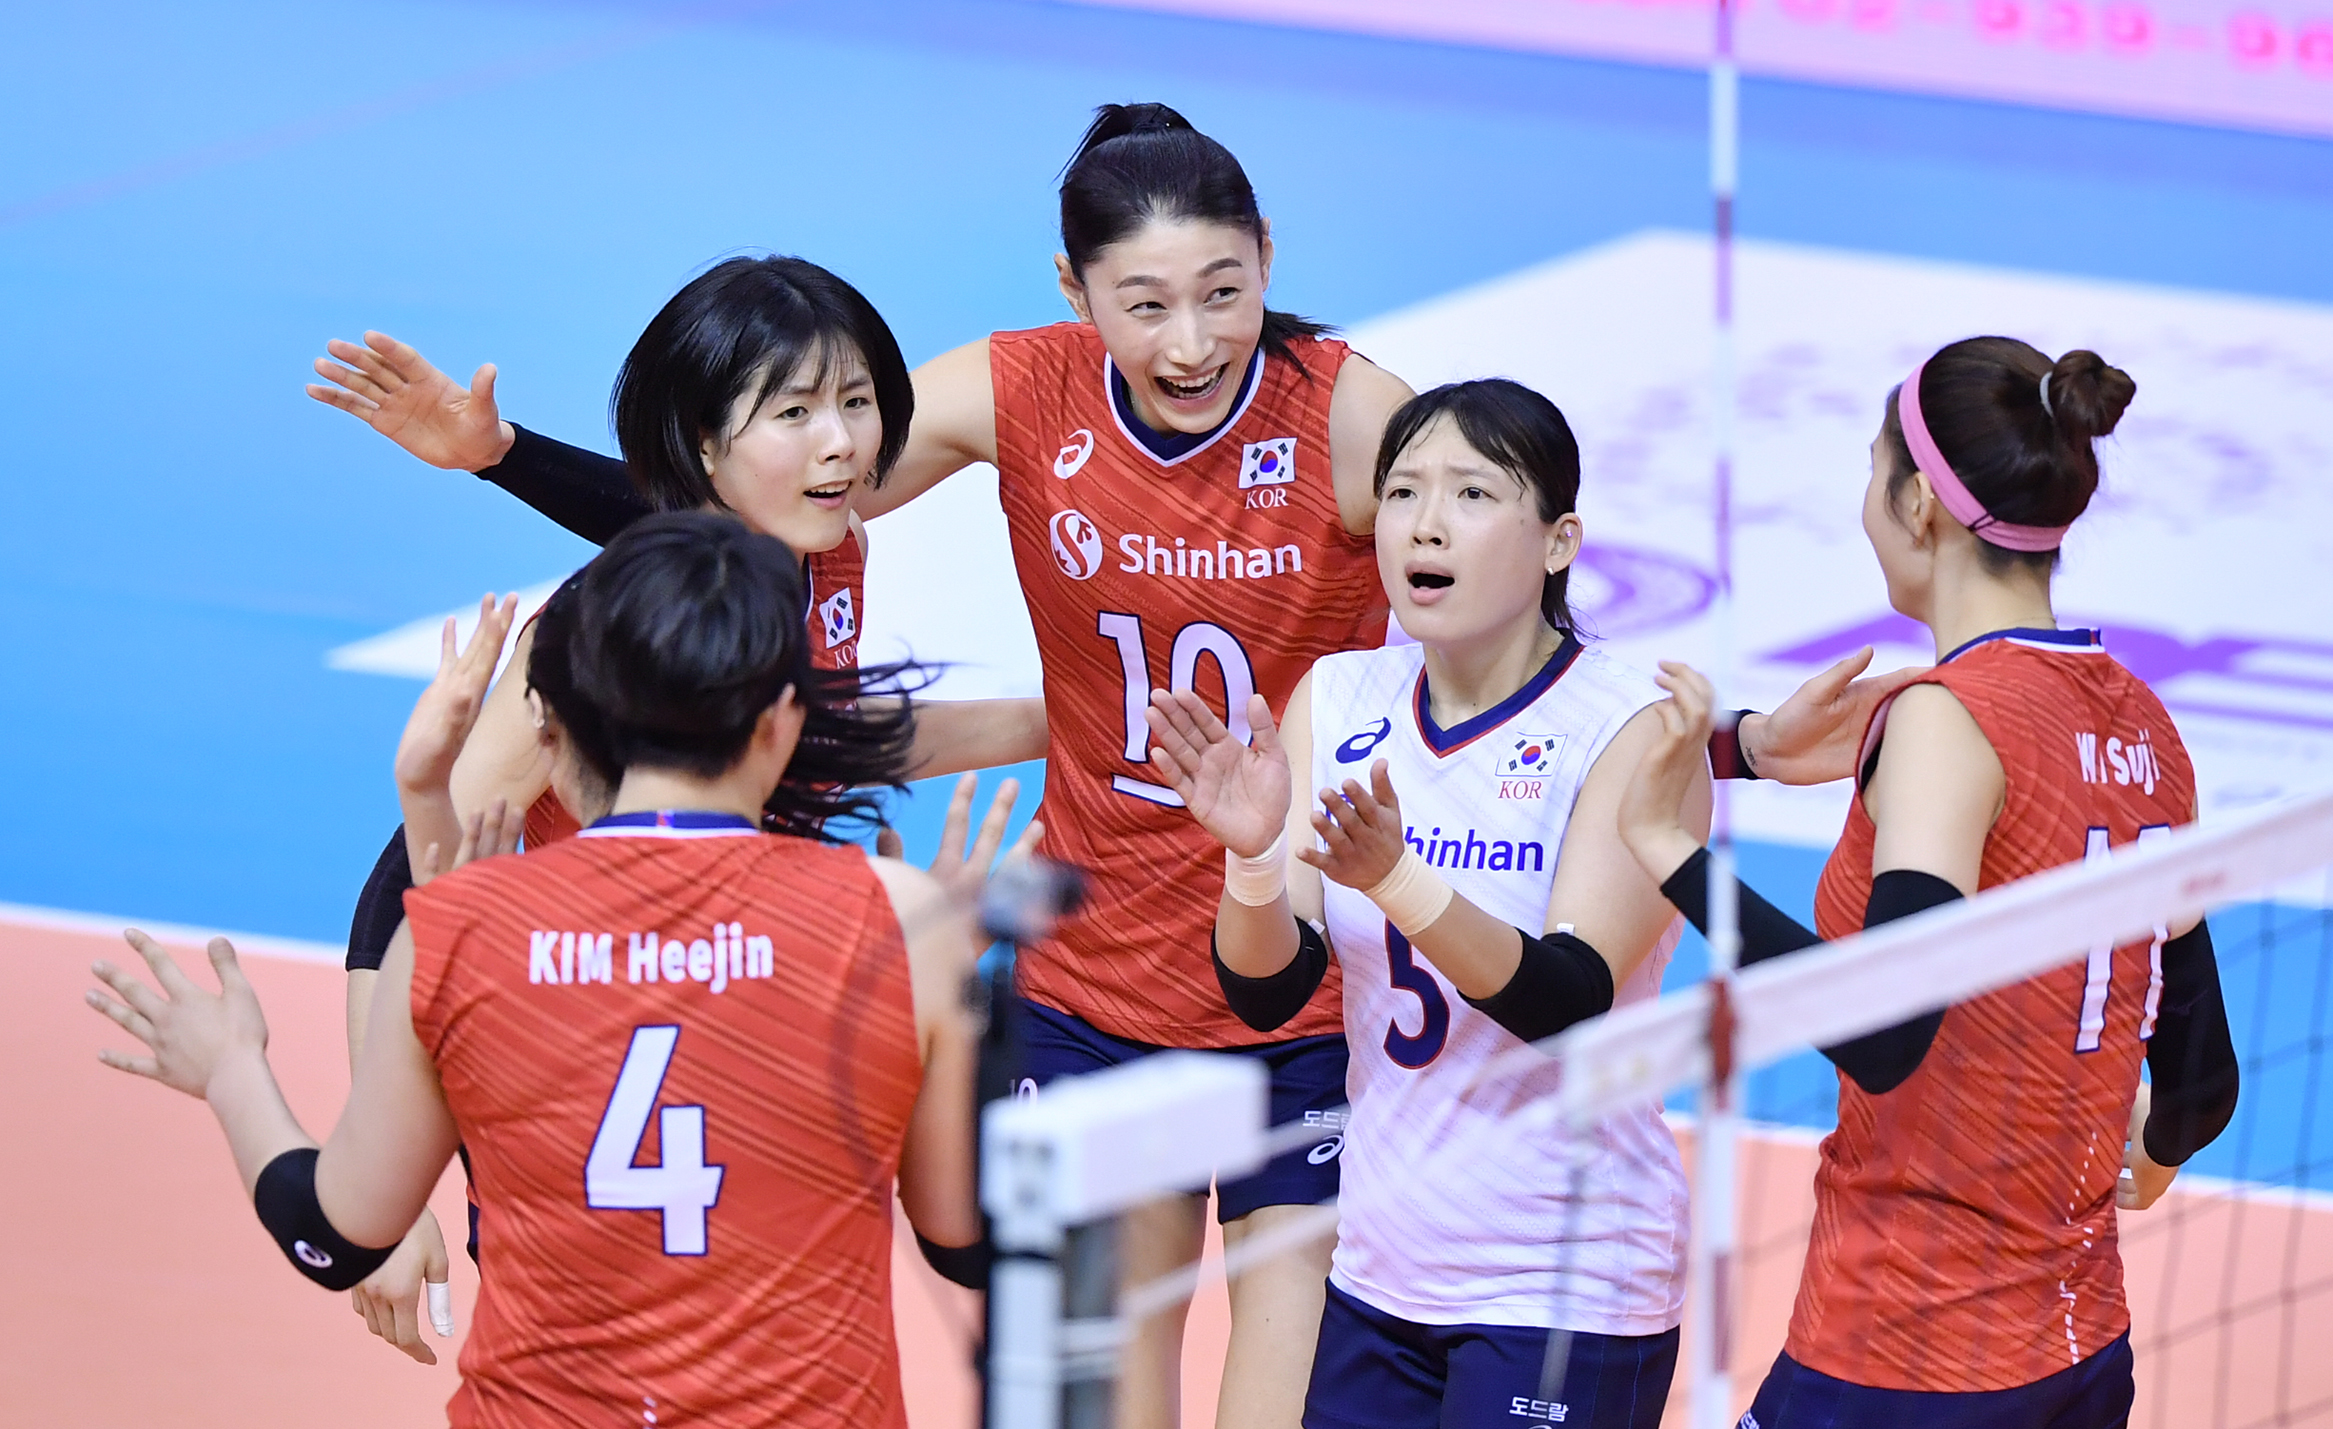 KOREA POWER PAST KAZAKHS TO TOP POOL B AT AVC WOMEN’S TOKYO VOLLEYBALL QUALIFICATION